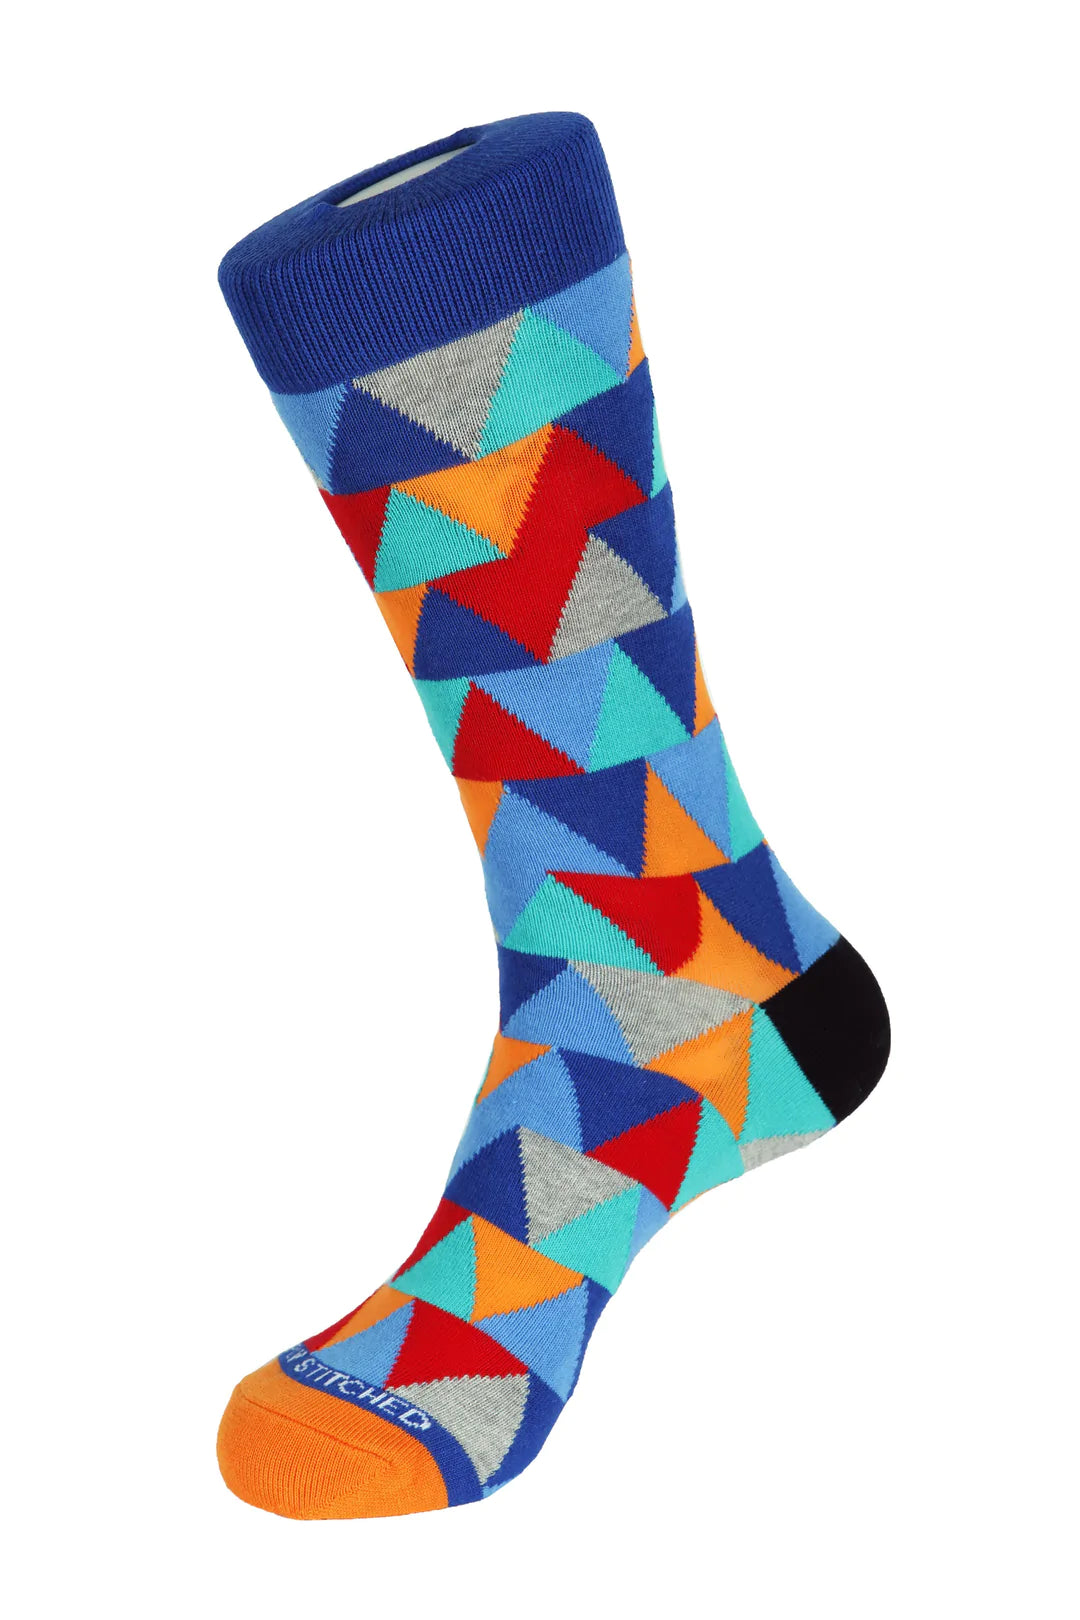 Unsimply Stitched socks with blue, orange, and grey triangle shapes, making it a great pairing with DFR89 blue denim jeans and a fun Sugar sport shirt.